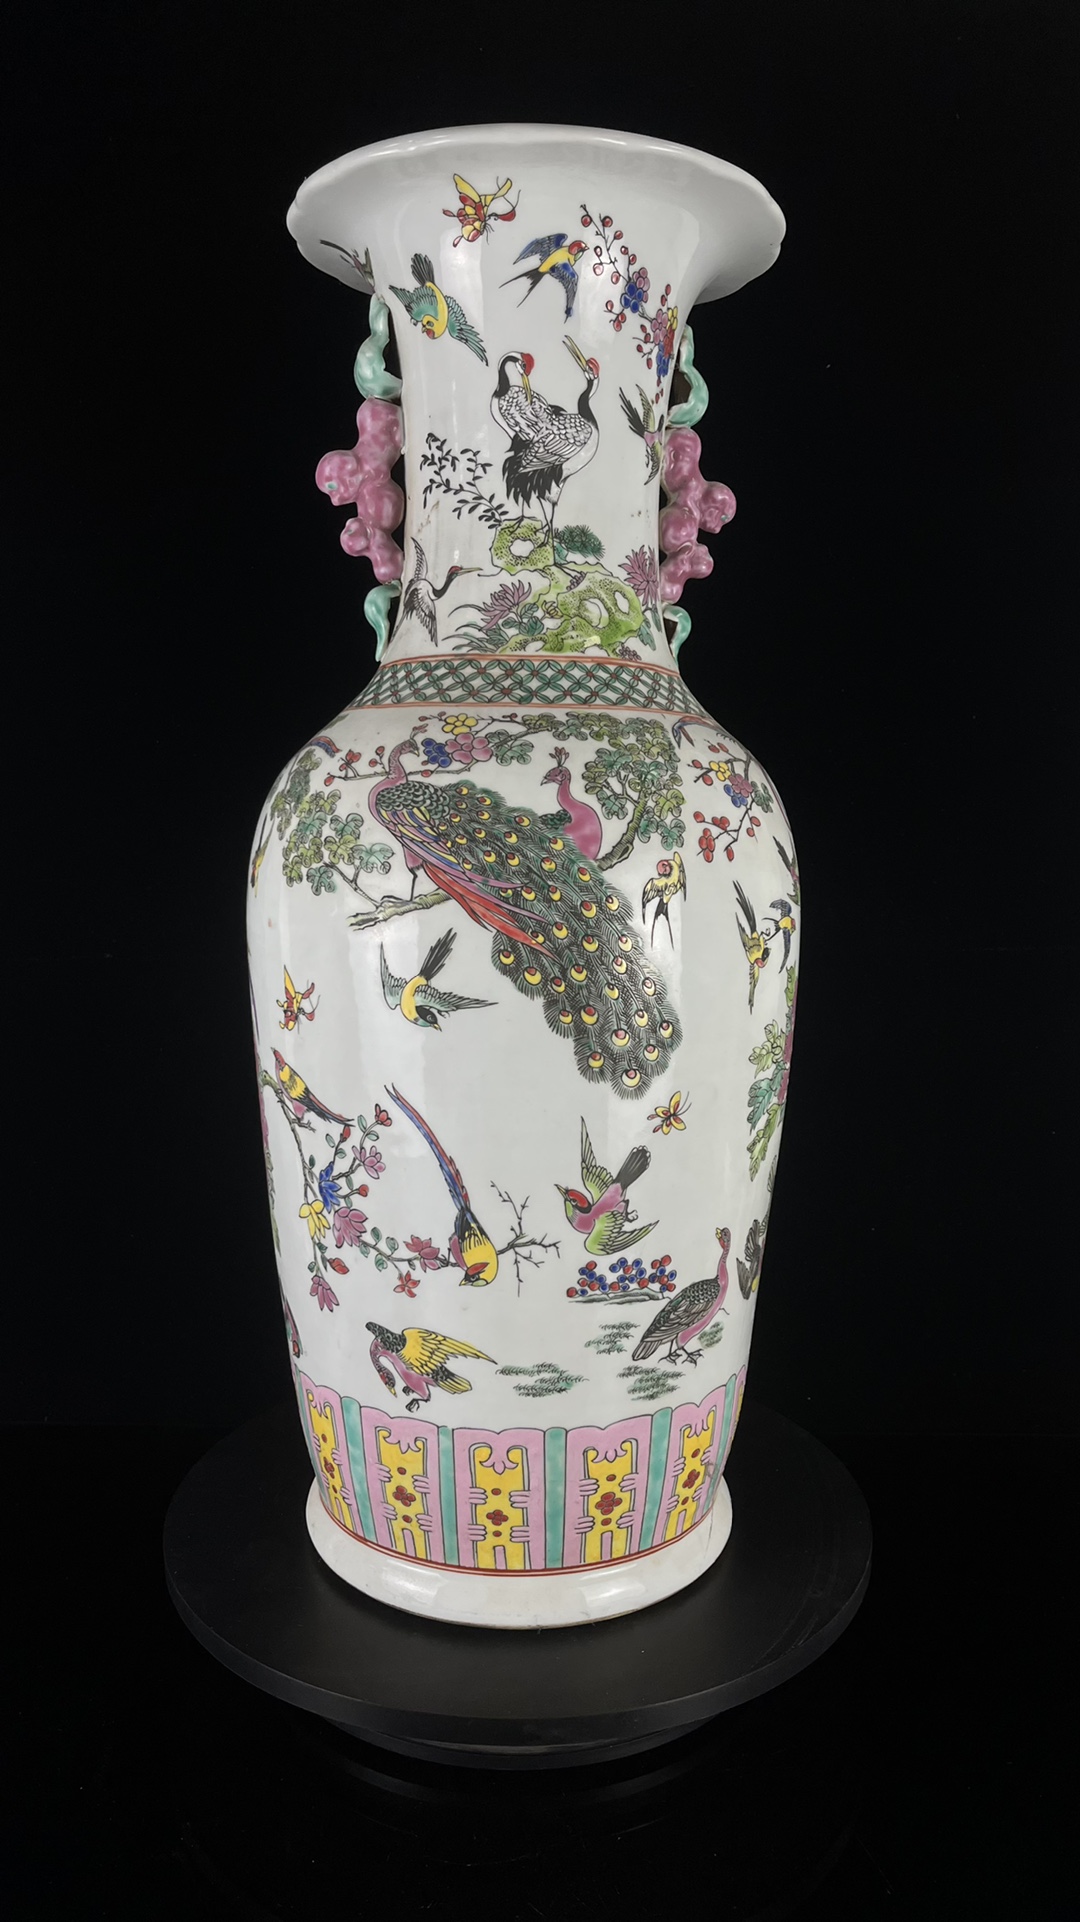 Large flower and bird vase made in the Kangxi period of the Qing Dynasty - Image 4 of 9